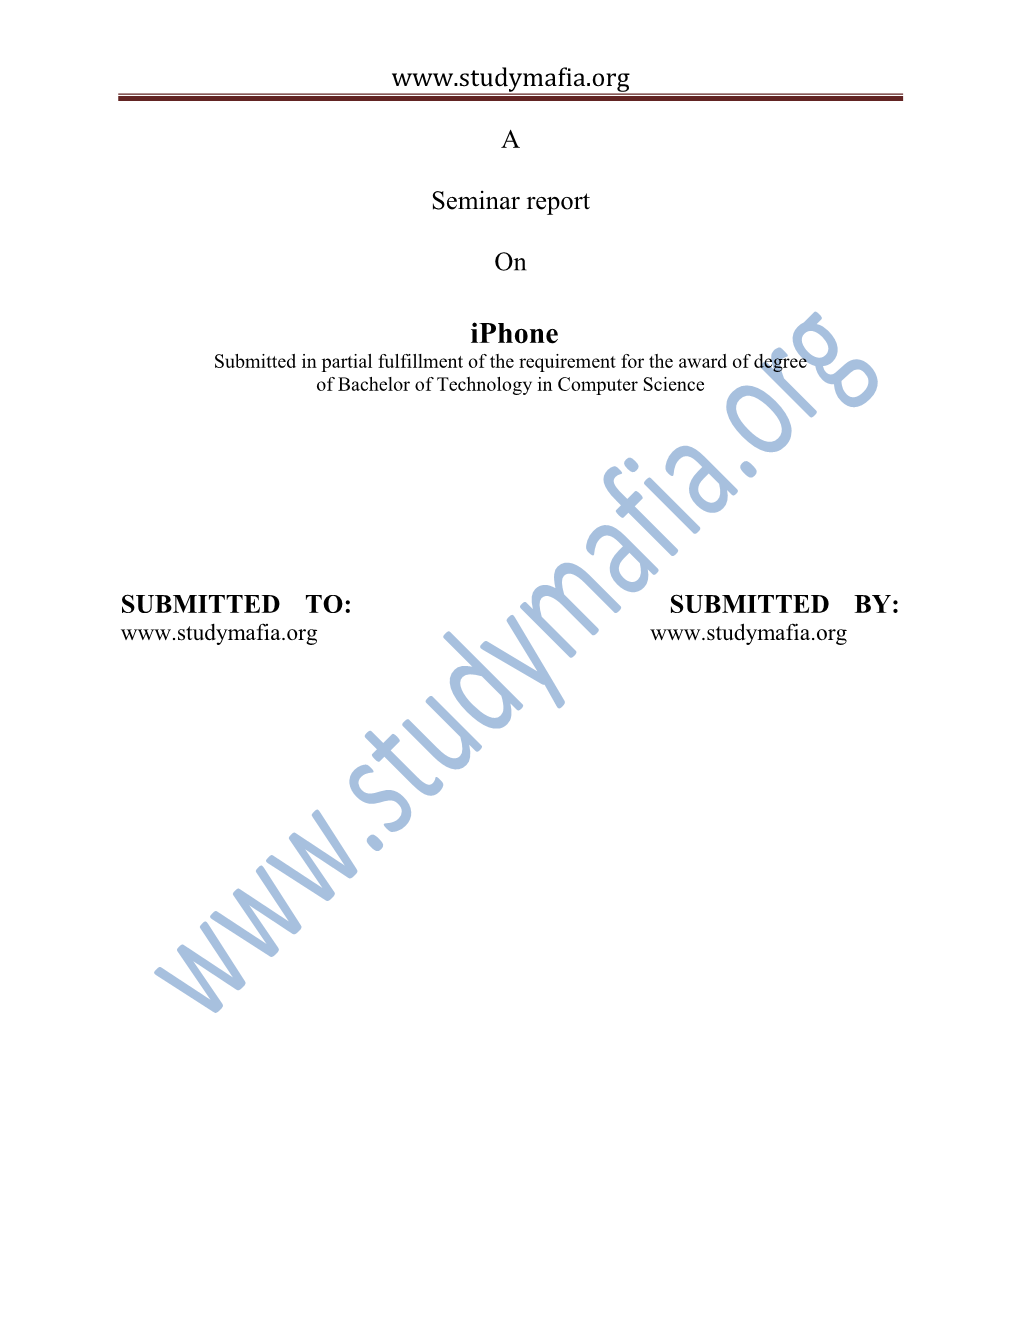 Iphone Submitted in Partial Fulfillment of the Requirement for the Award of Degree of Bachelor of Technology in Computer Science